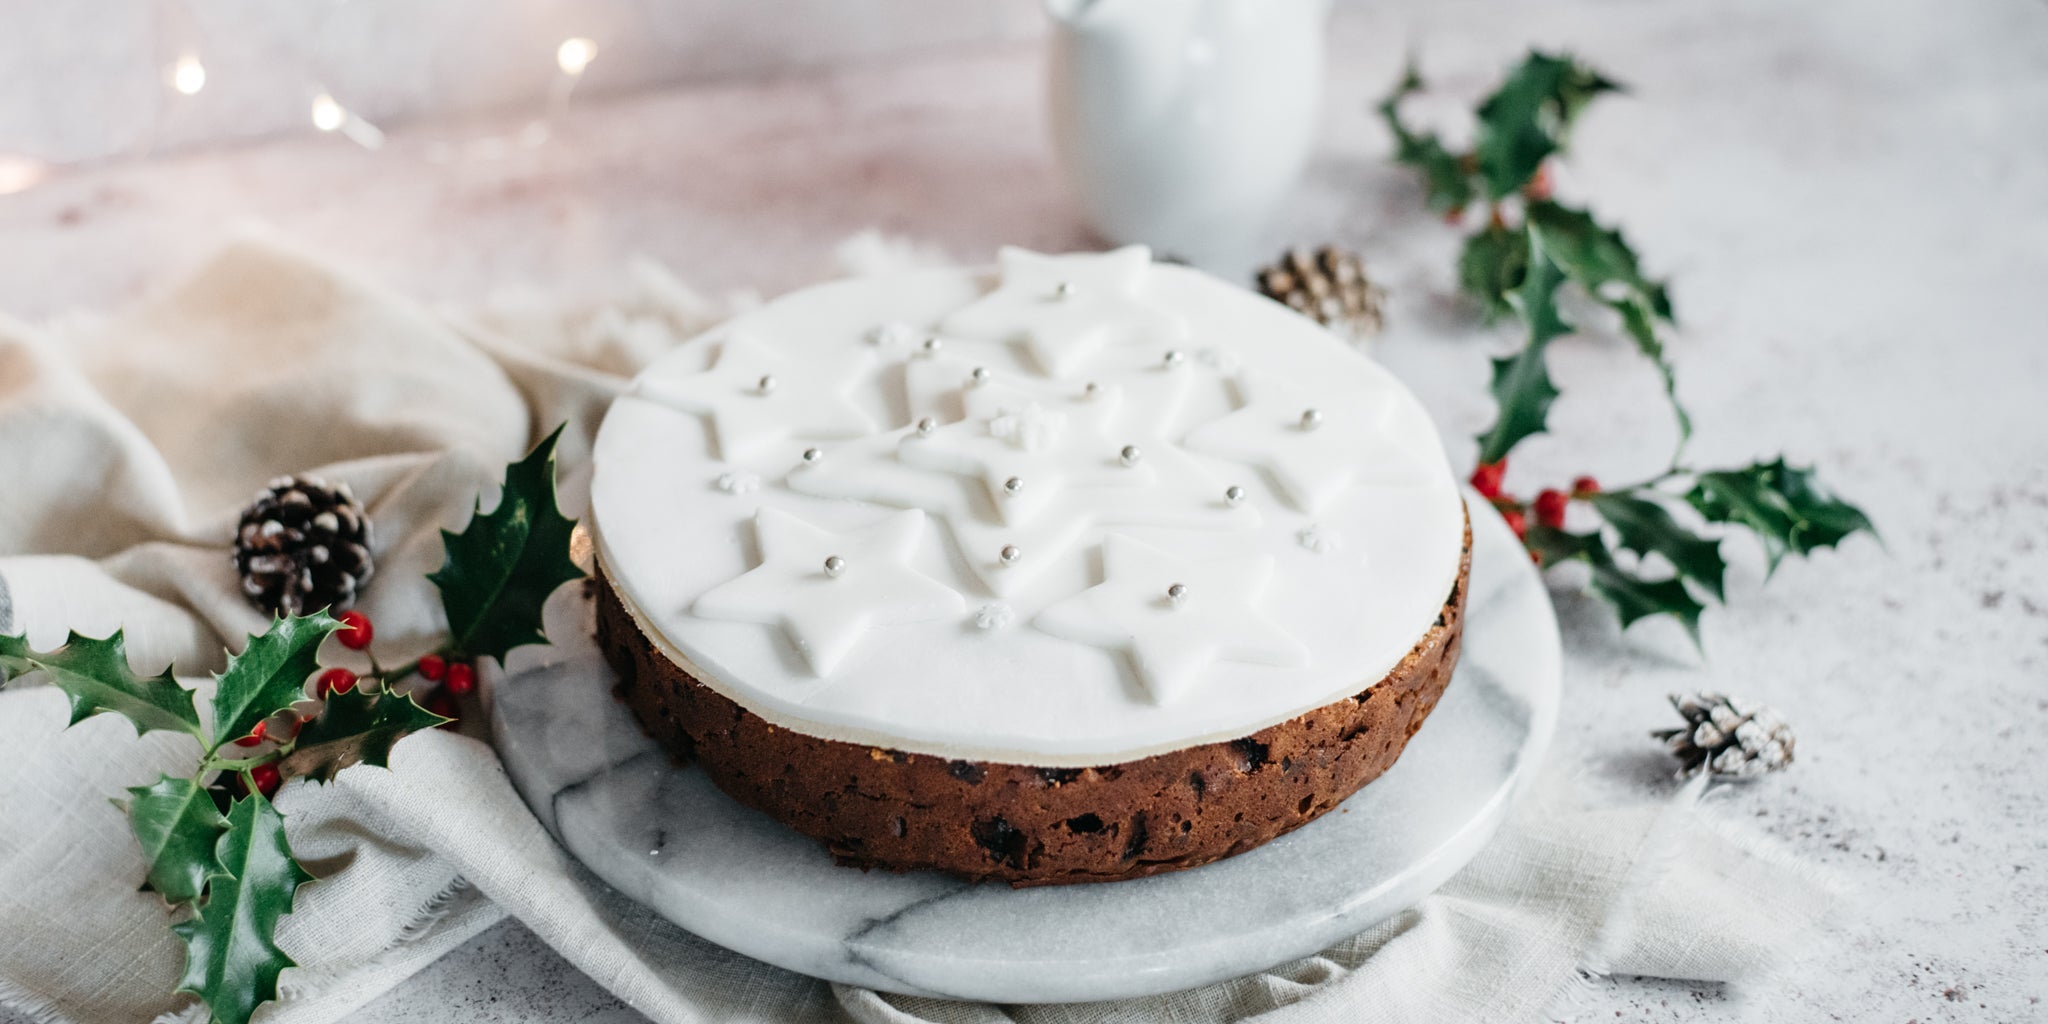 Fruit cake decorated with white icing and stars, surrounded by holly and pine cones